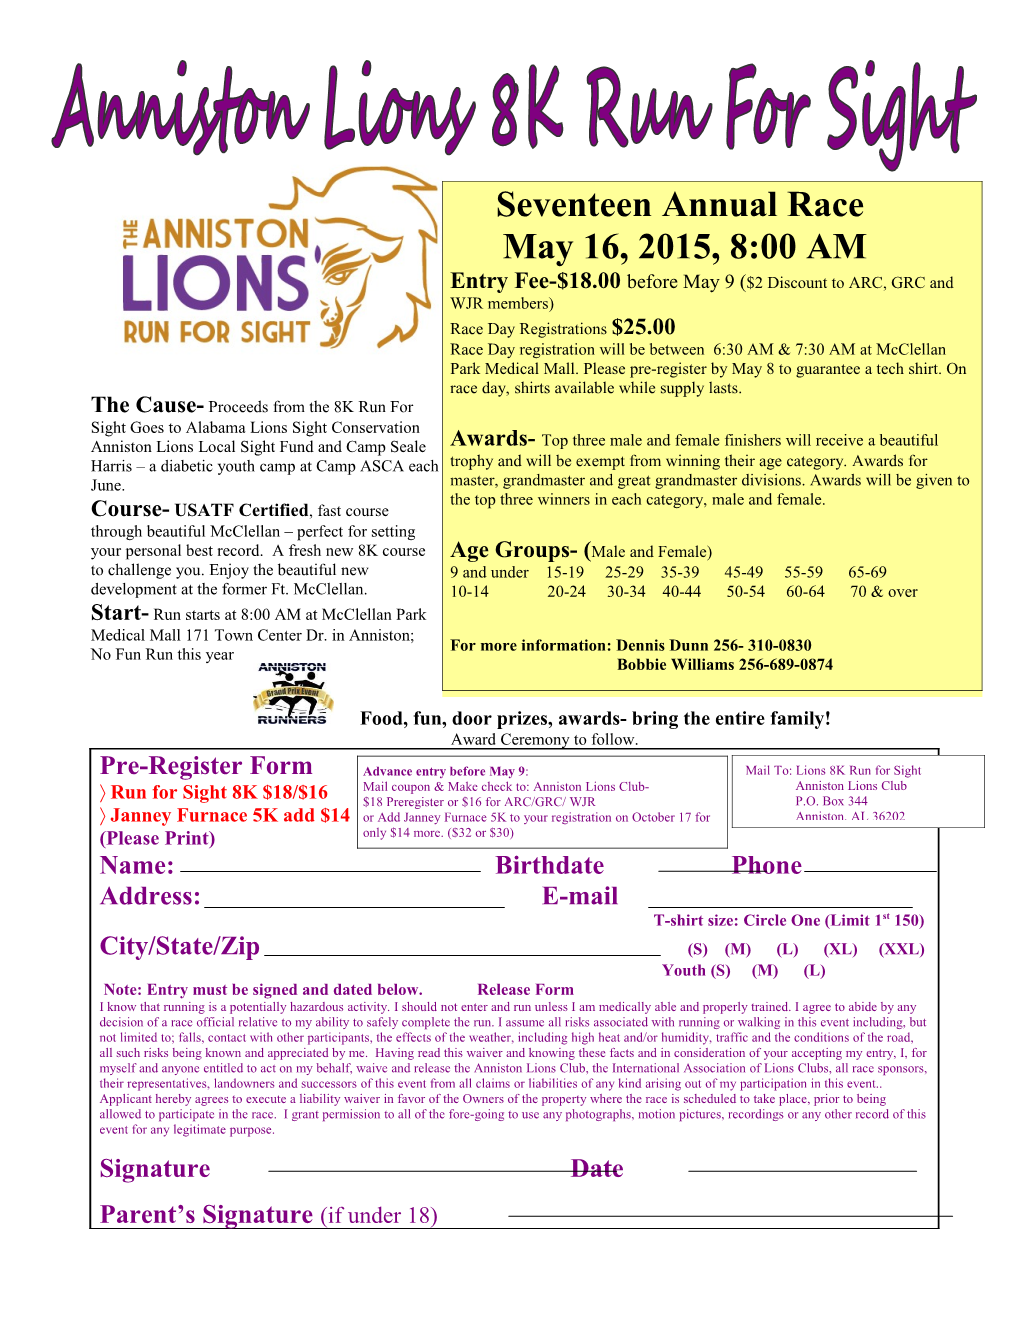 Anniston Lions Run for Sight